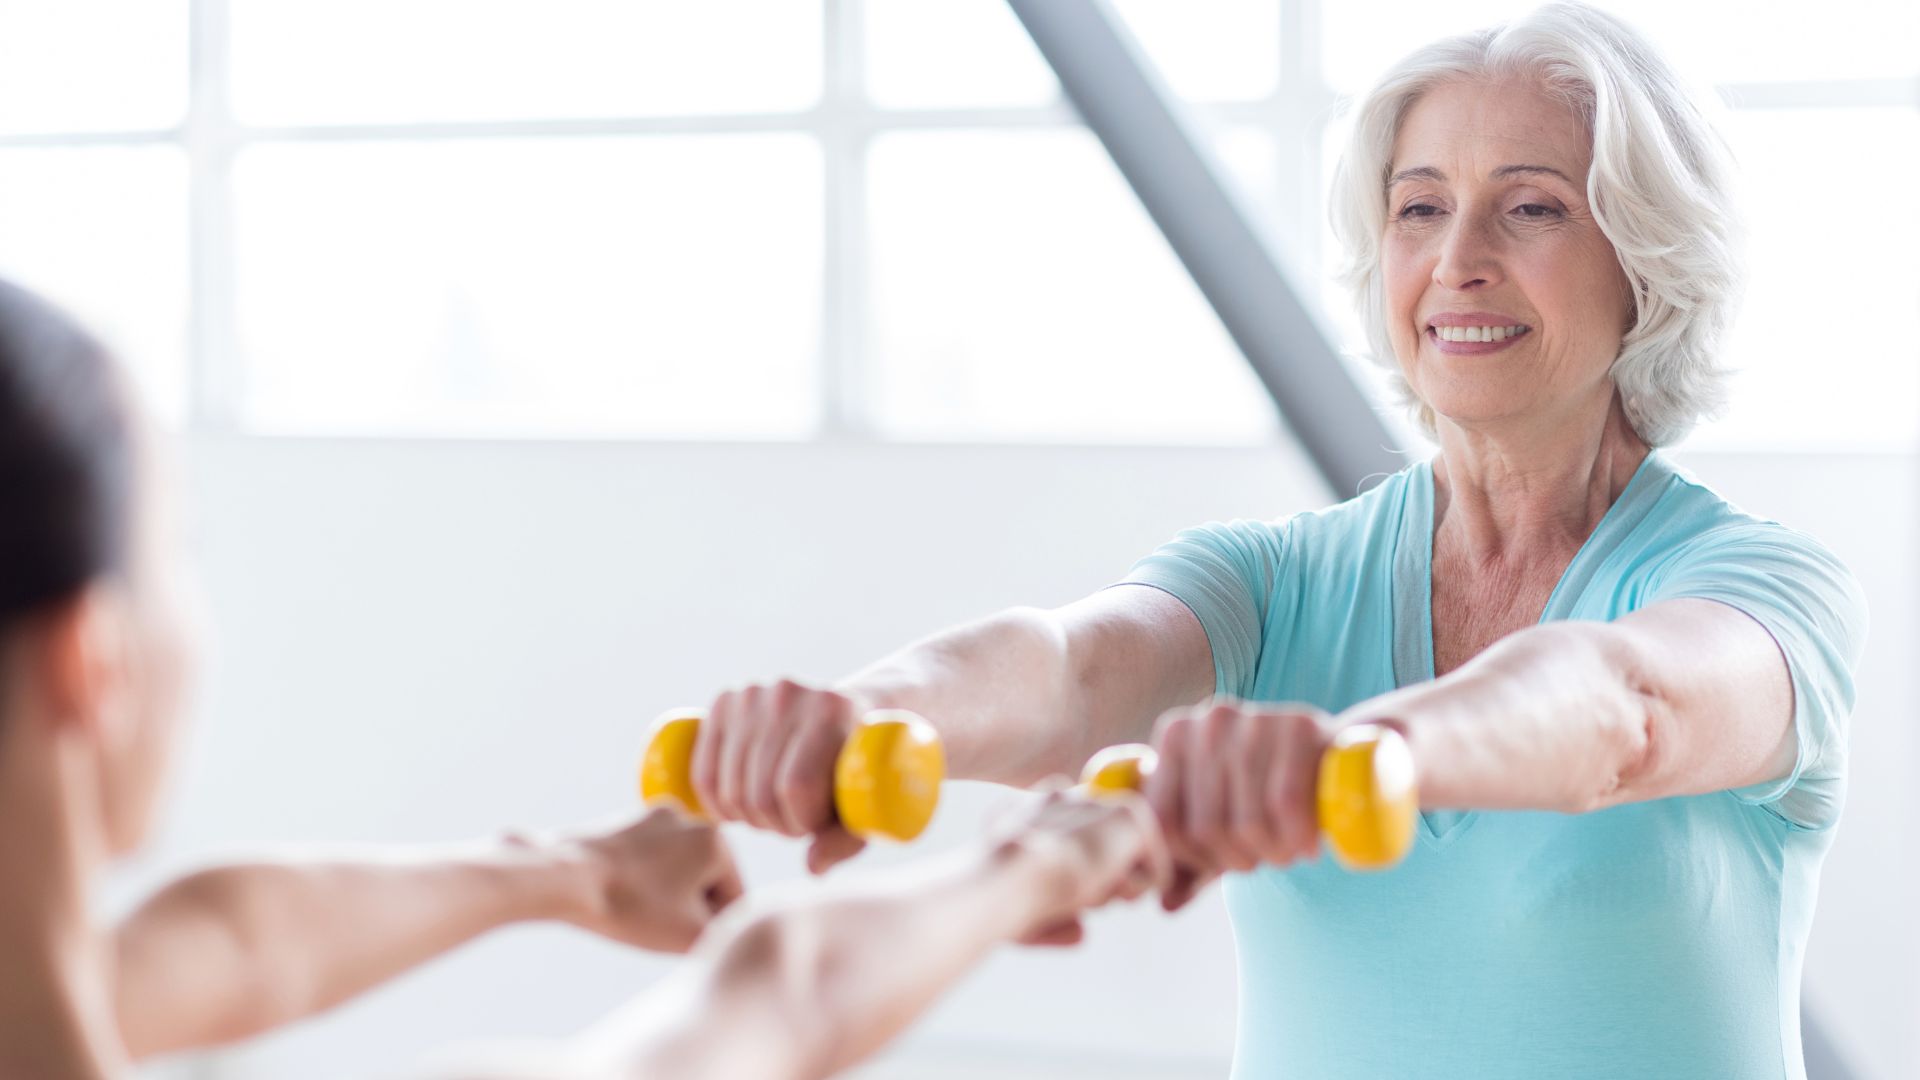 An older woman holds weights out in front of her, working out with a personal trainer. Image demonstrates how women after menopause work to lose weight.